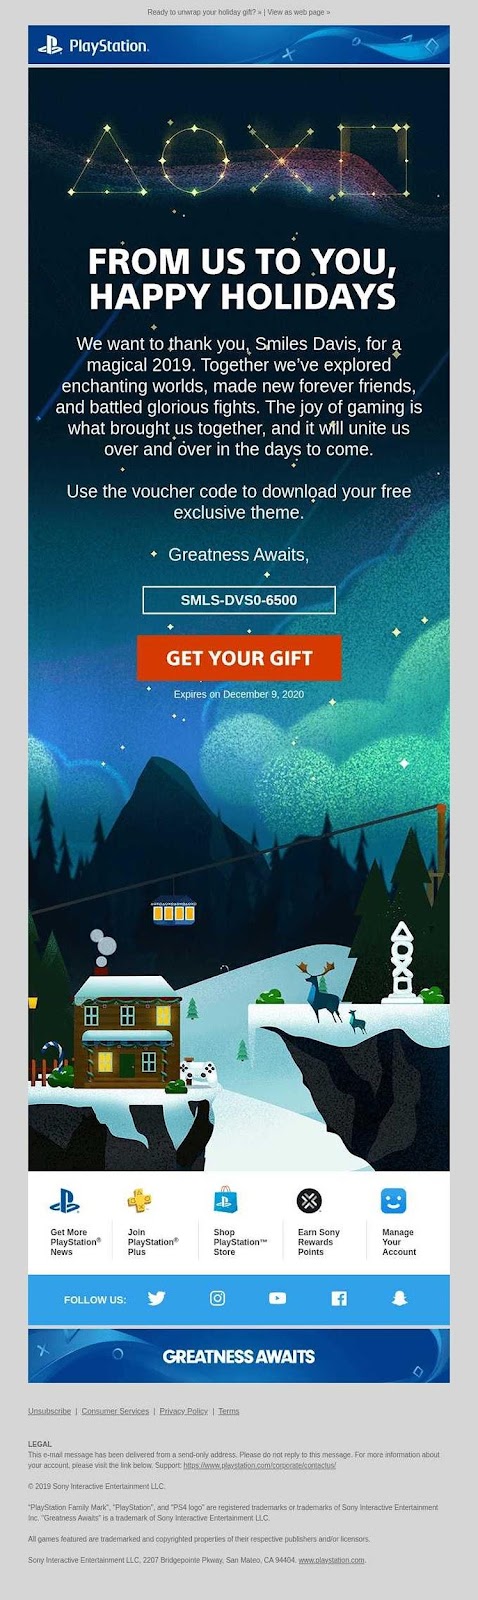 Playstation holiday email example